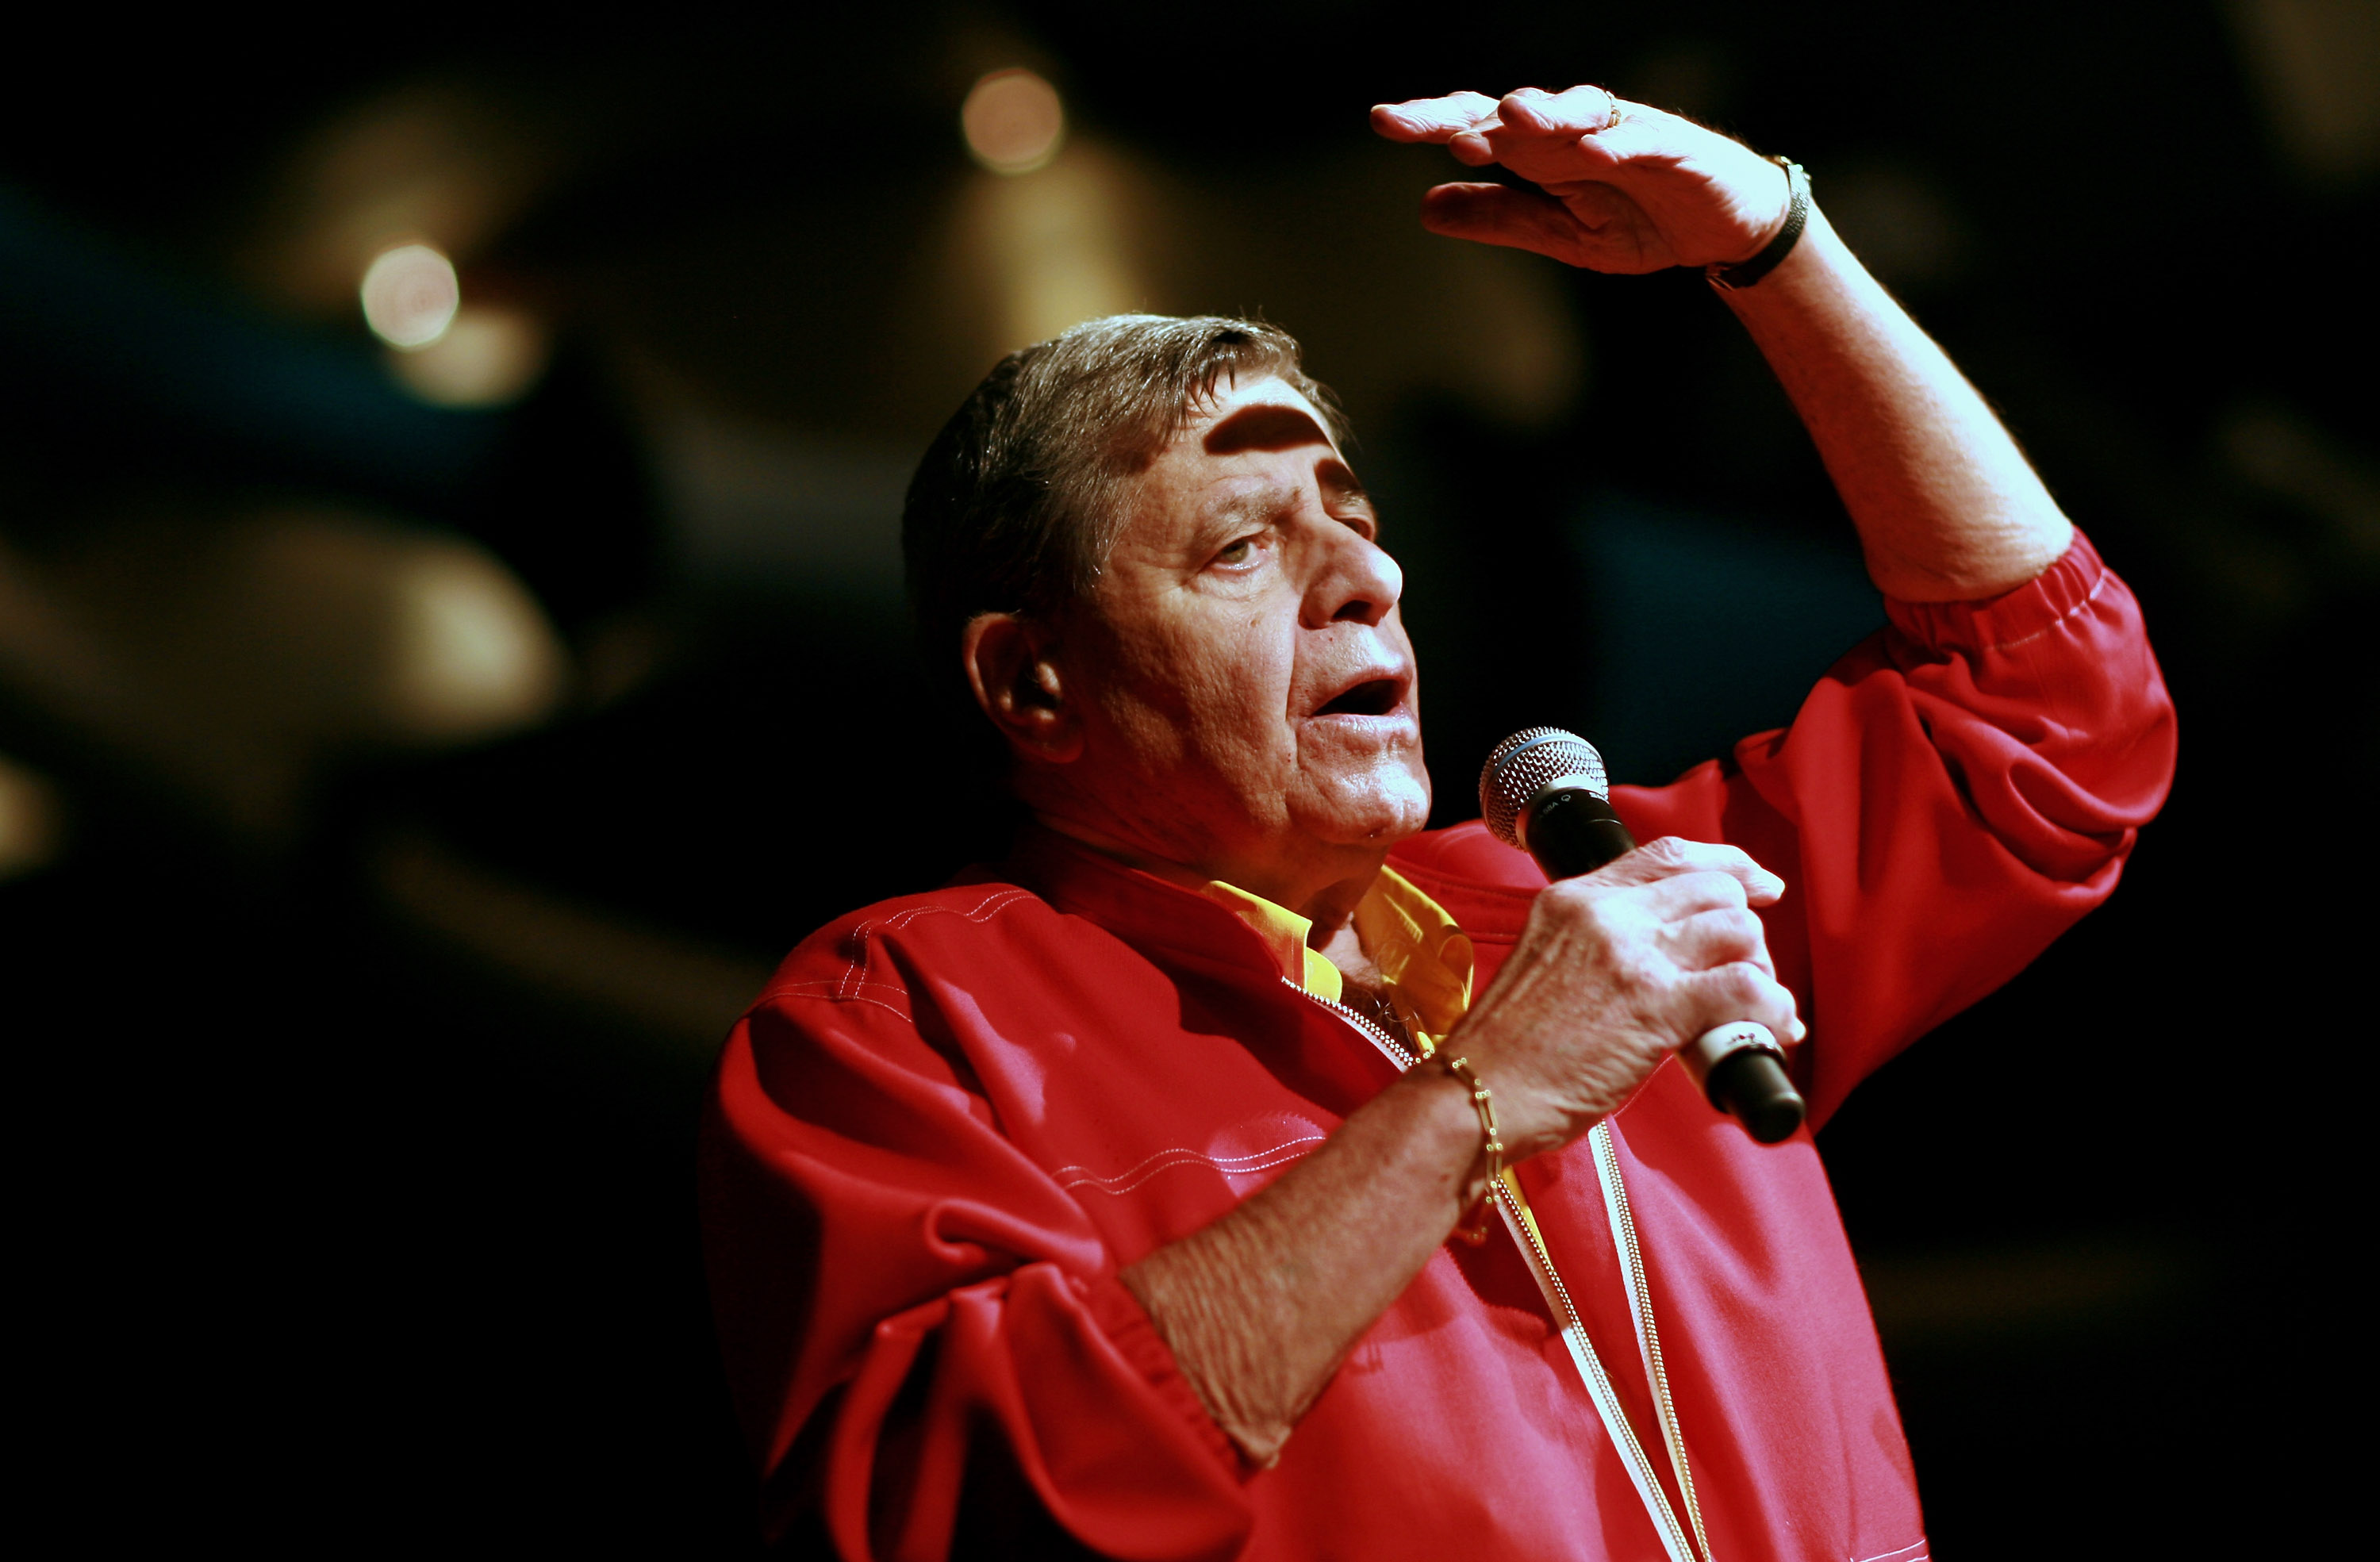 Comedian Jerry Lewis speaks to children and their families at a Muscular Dystrophy Family Day held at Star City on September 16, 2009 in Sydney, Australia | Source: Getty Images